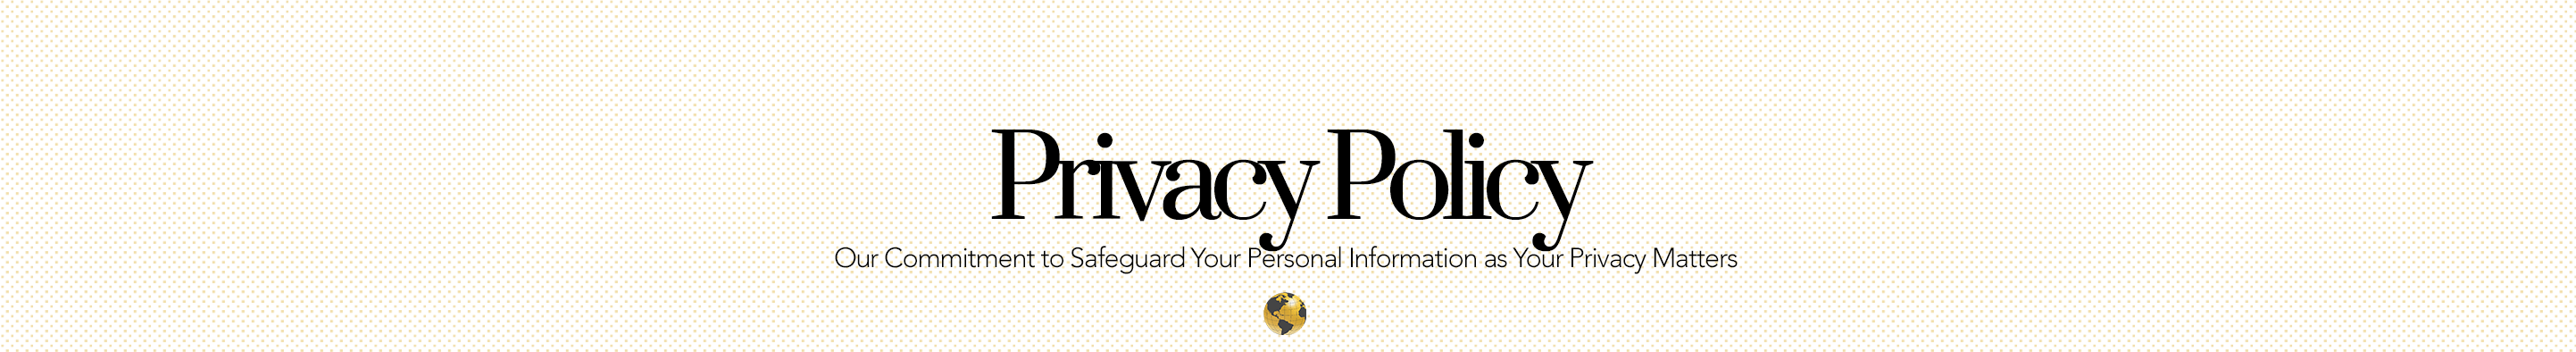 TOG Privacy Policy PAGE